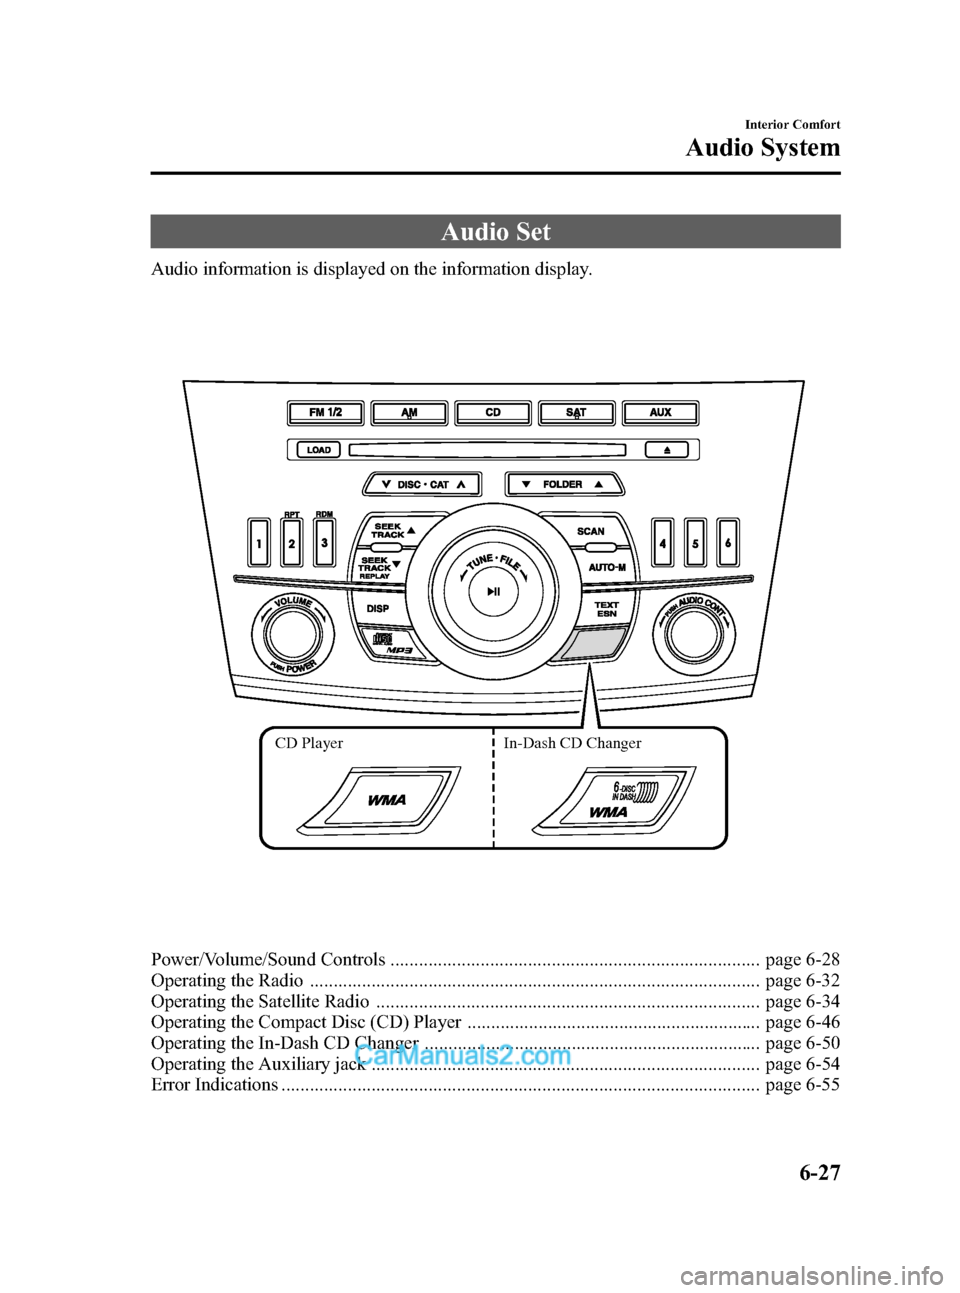 MAZDA MODEL MAZDASPEED 3 2012  Owners Manual (in English) Black plate (259,1)
Audio Set
Audio information is displayed on the information display.
CD Player In-Dash CD Changer
Power/Volume/Sound Controls ......................................................